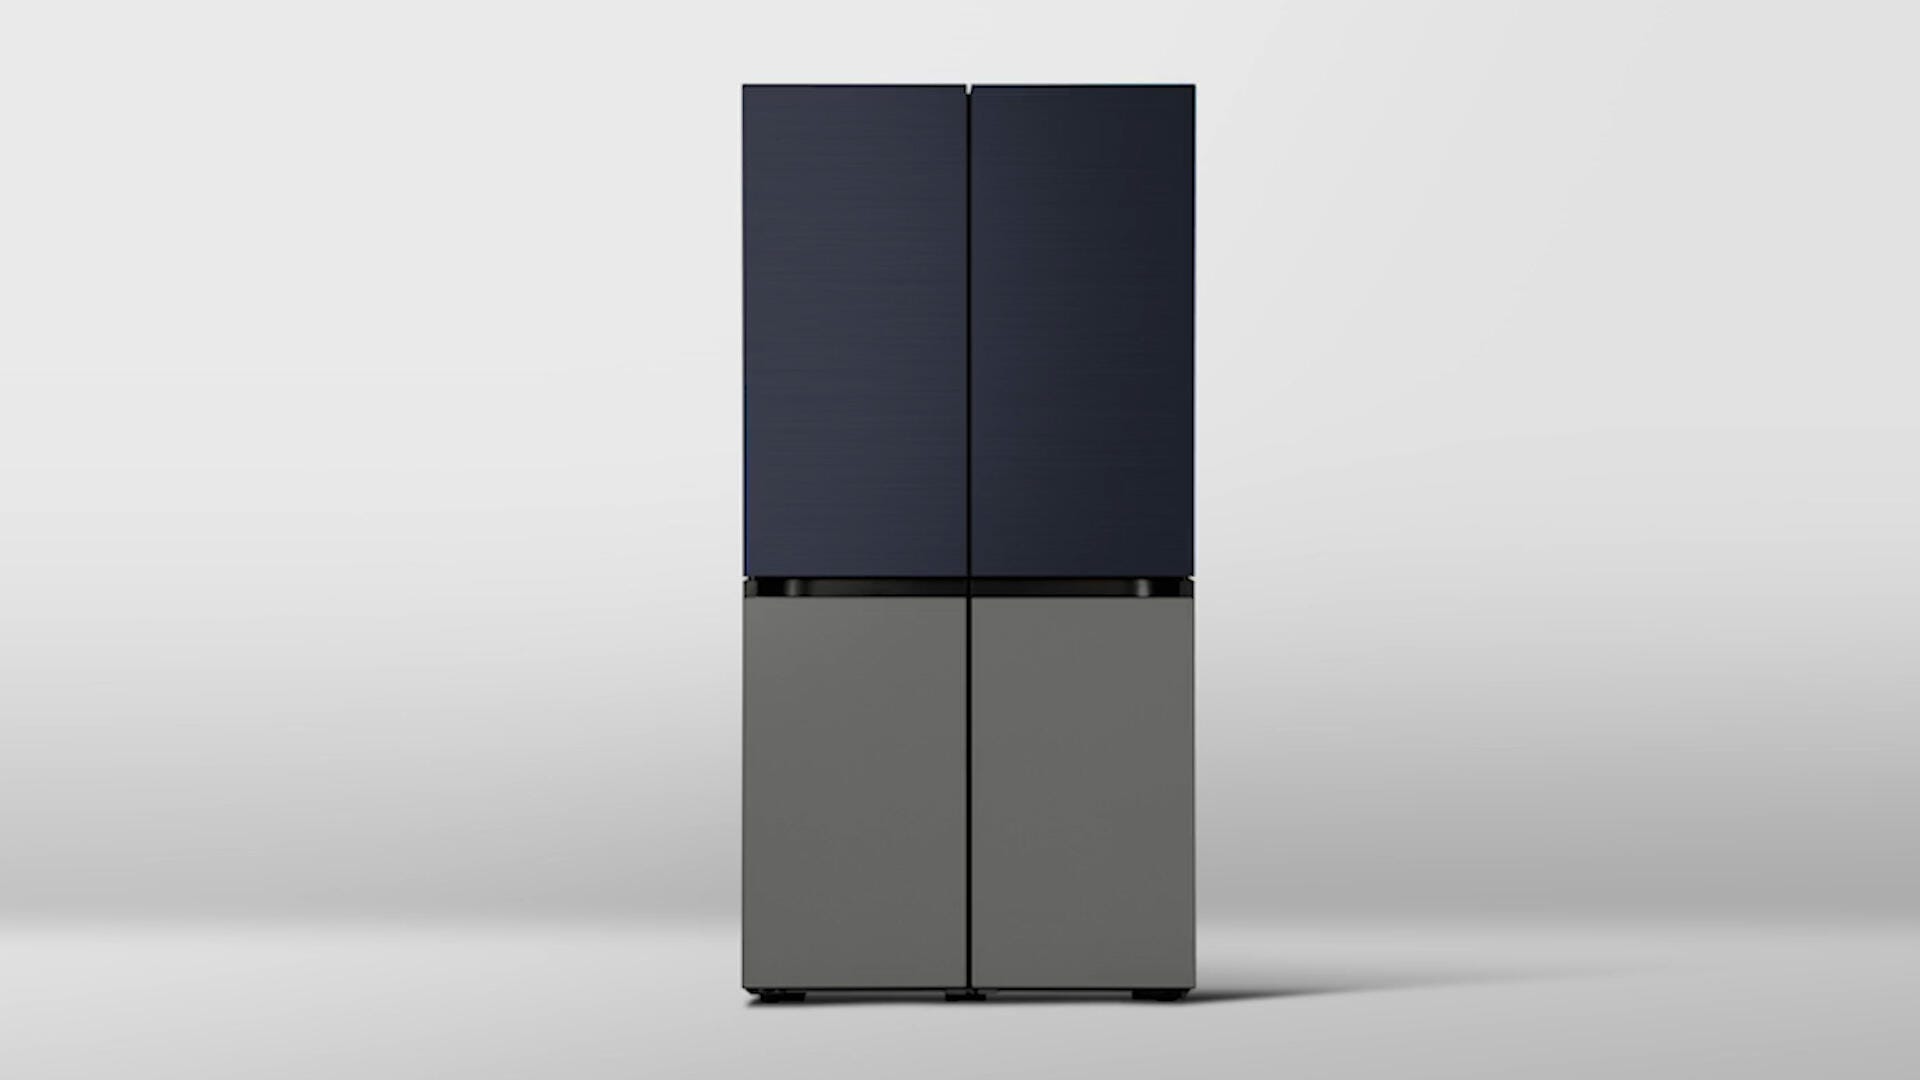 The Samsung RF23M8090SG is one of the nicest French door refrigerators  we've tested - CNET